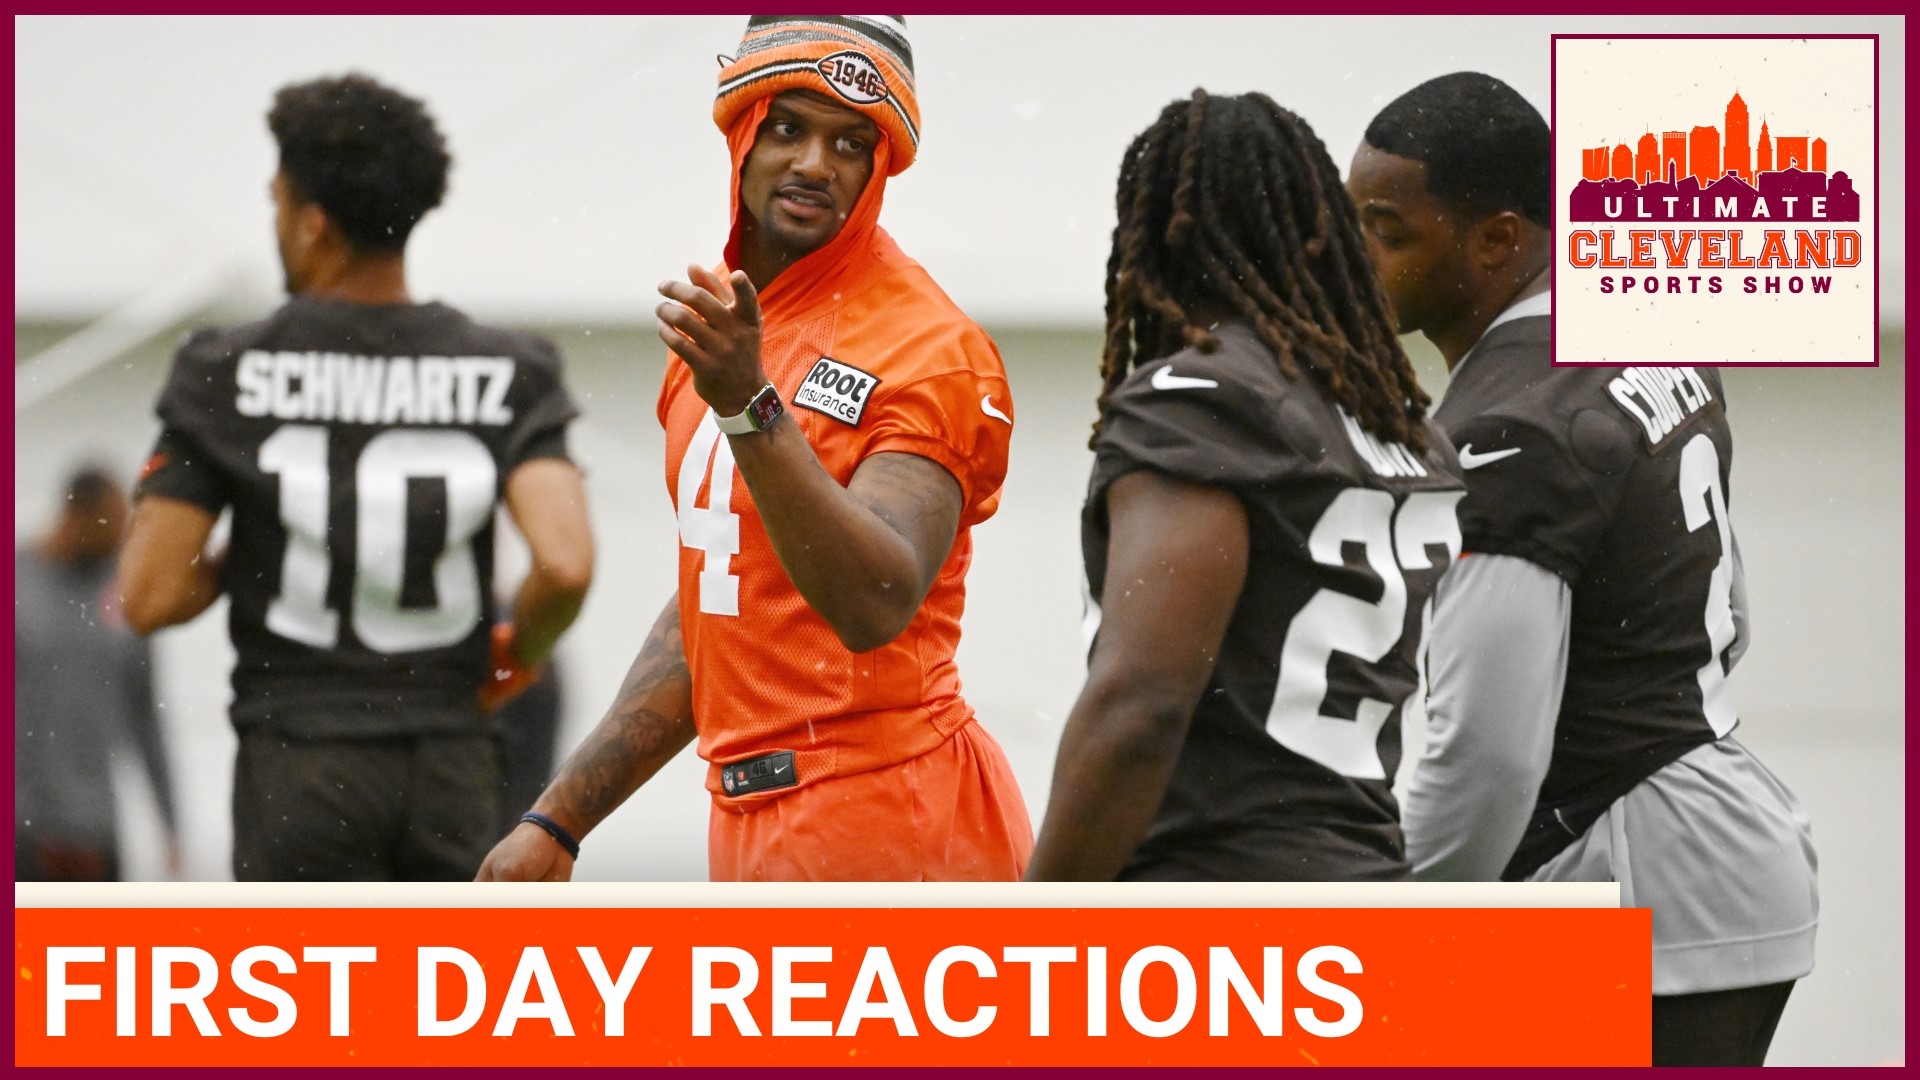 Day 1 of training camp for the Cleveland Browns is officially in the books and Deshaun Watson practiced with his teammates while awaiting a potential punishment.